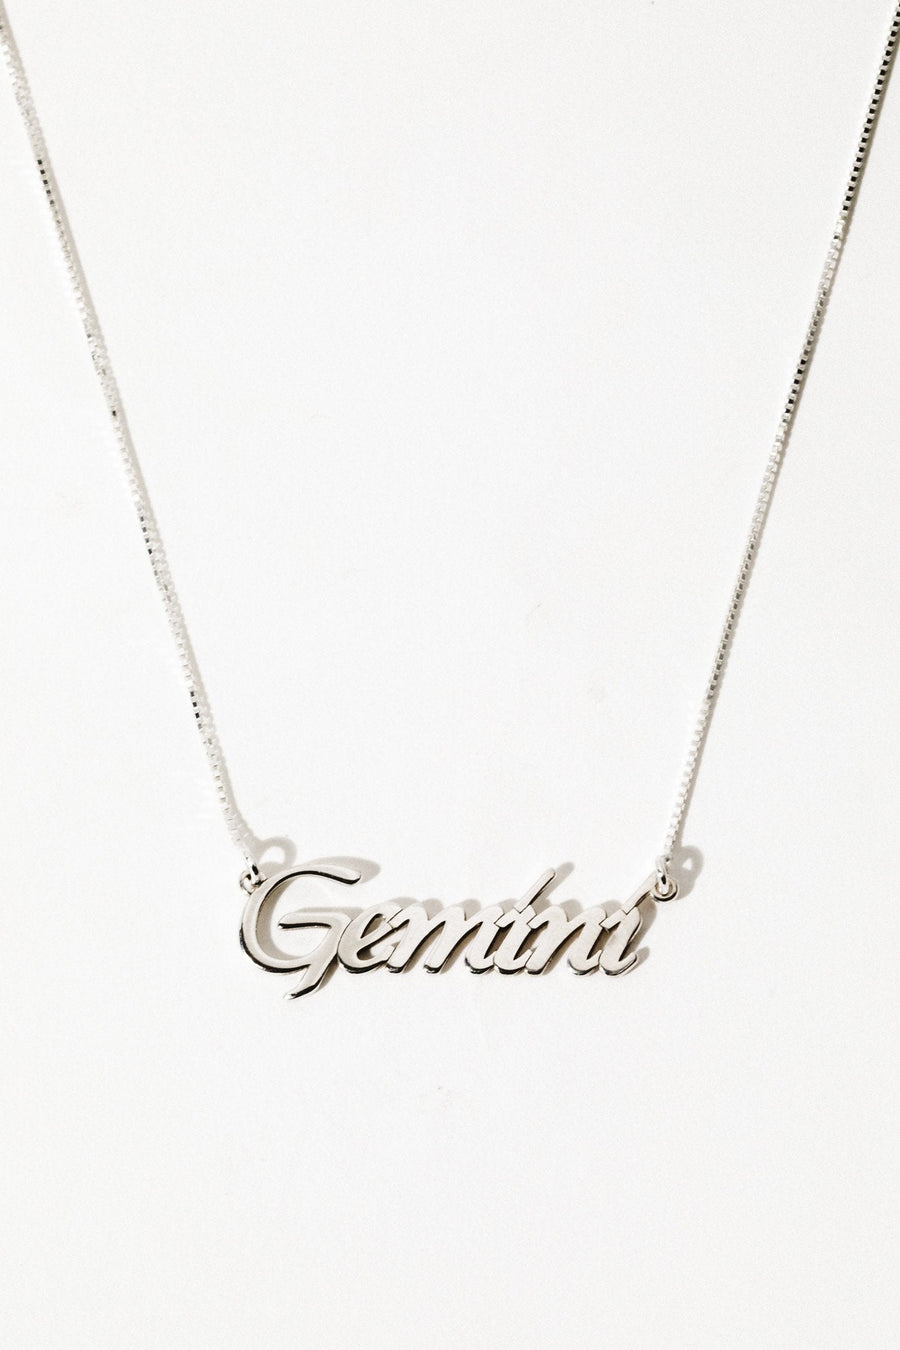 The Goth Booth Jewelry Signature Zodiac Necklace .:. Silver